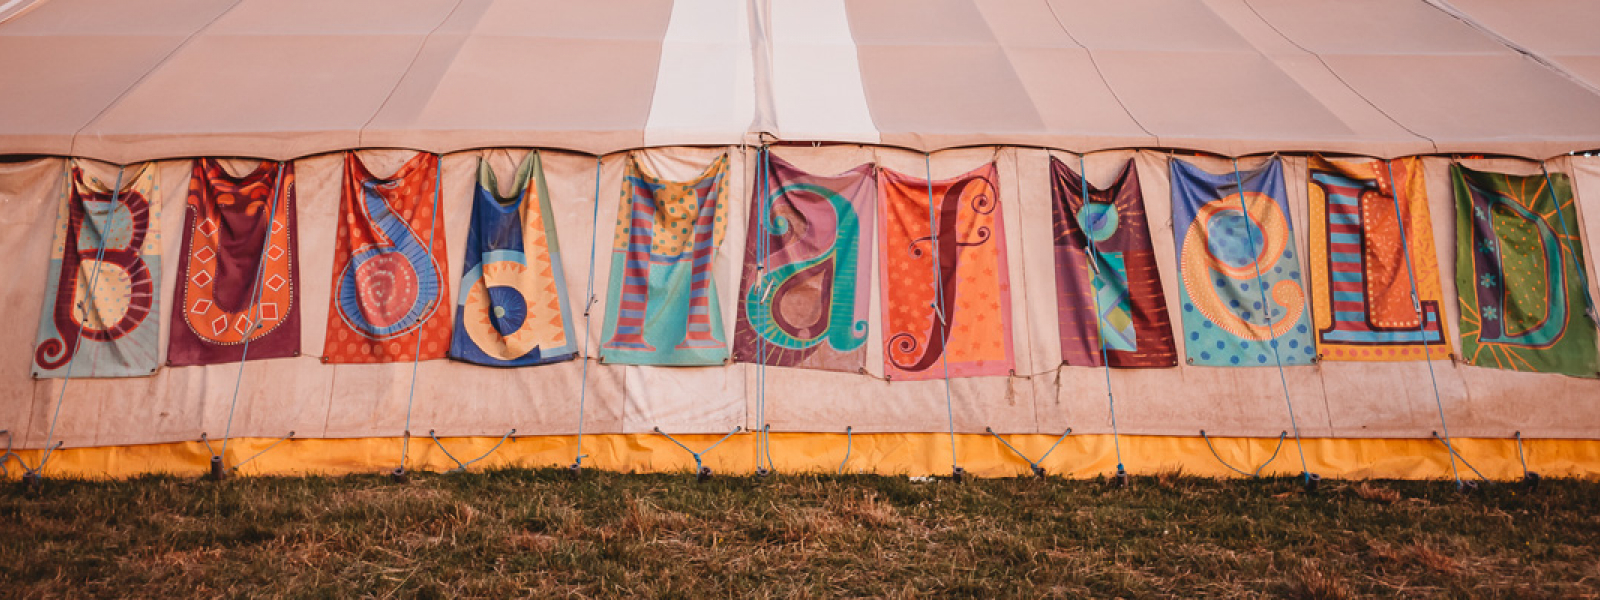 Flags on the side of a tent that spell out Buddhafield